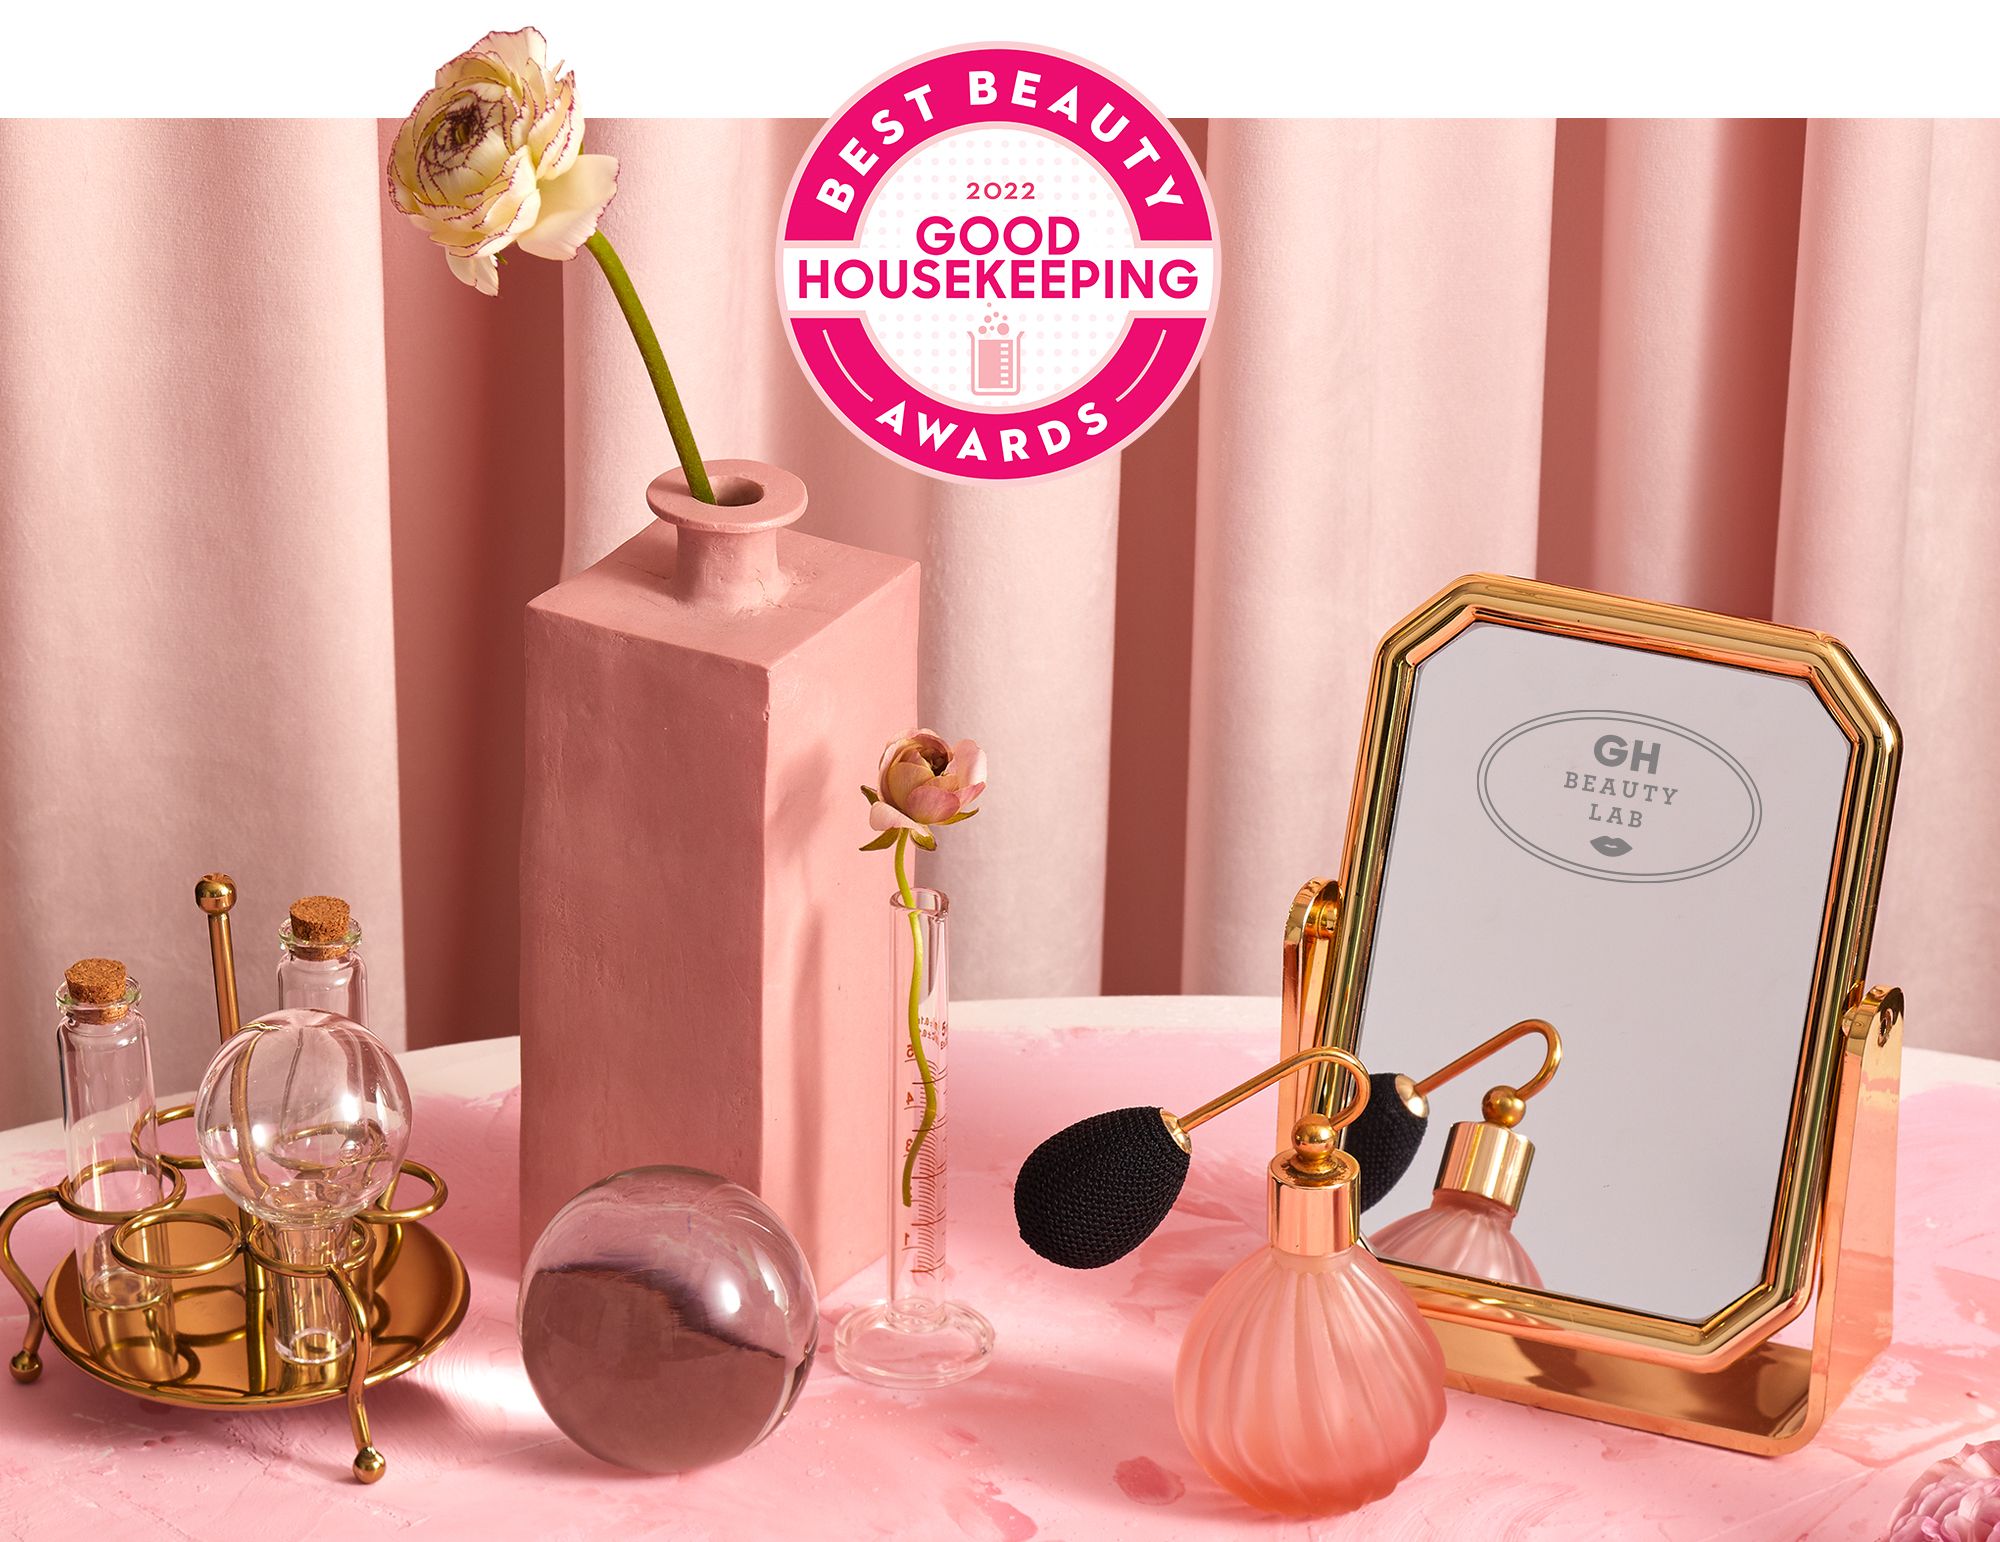 Beauty Awards 2022: Good Housekeeping's Top Beauty Picks of the Year